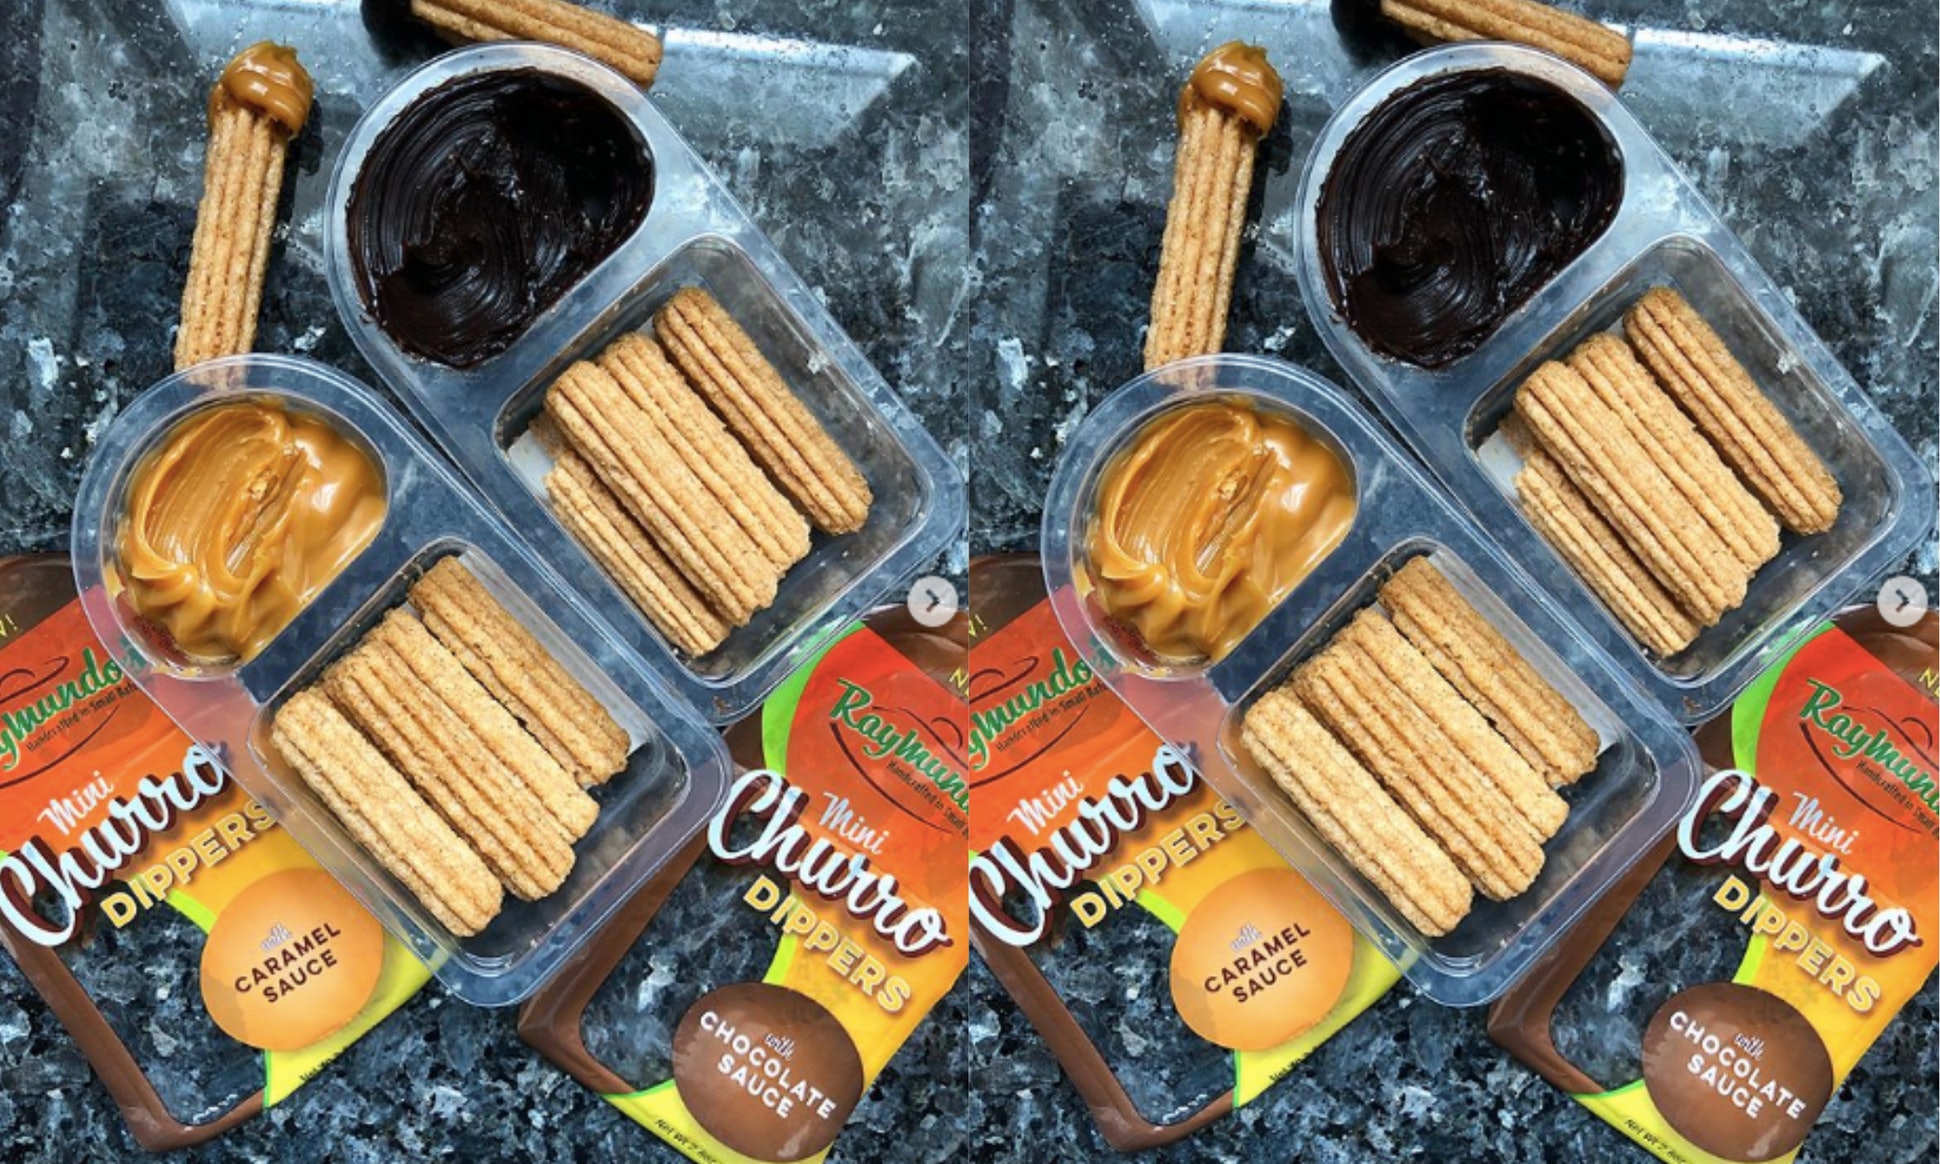 A Churros Version Of Dunkaroos Exists & It Comes In 2 Delicious Flavors - Raymundo's1940 x 1164